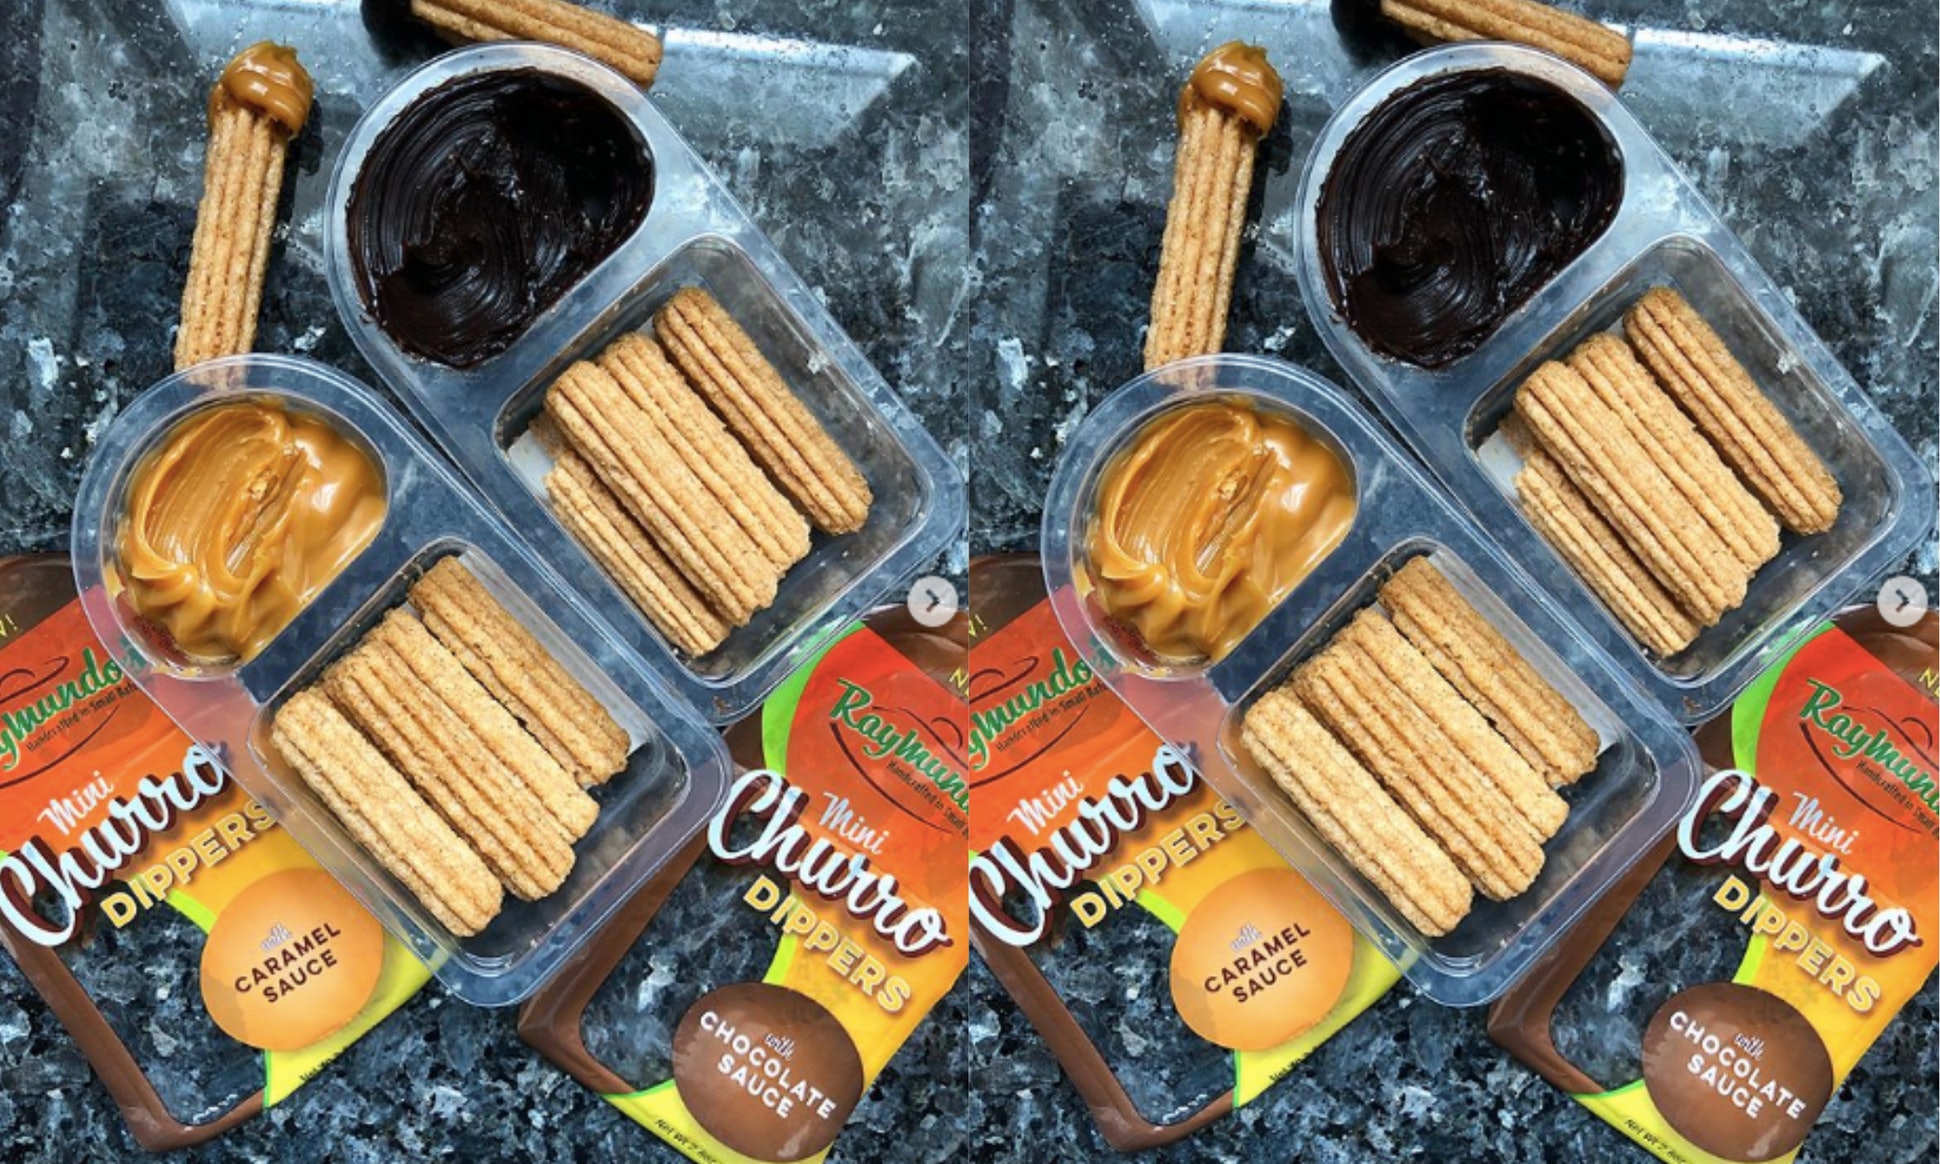 A Churros Version Of Dunkaroos Exists & It Comes In 2 Delicious Flavors - Raymundo's1940 x 1164